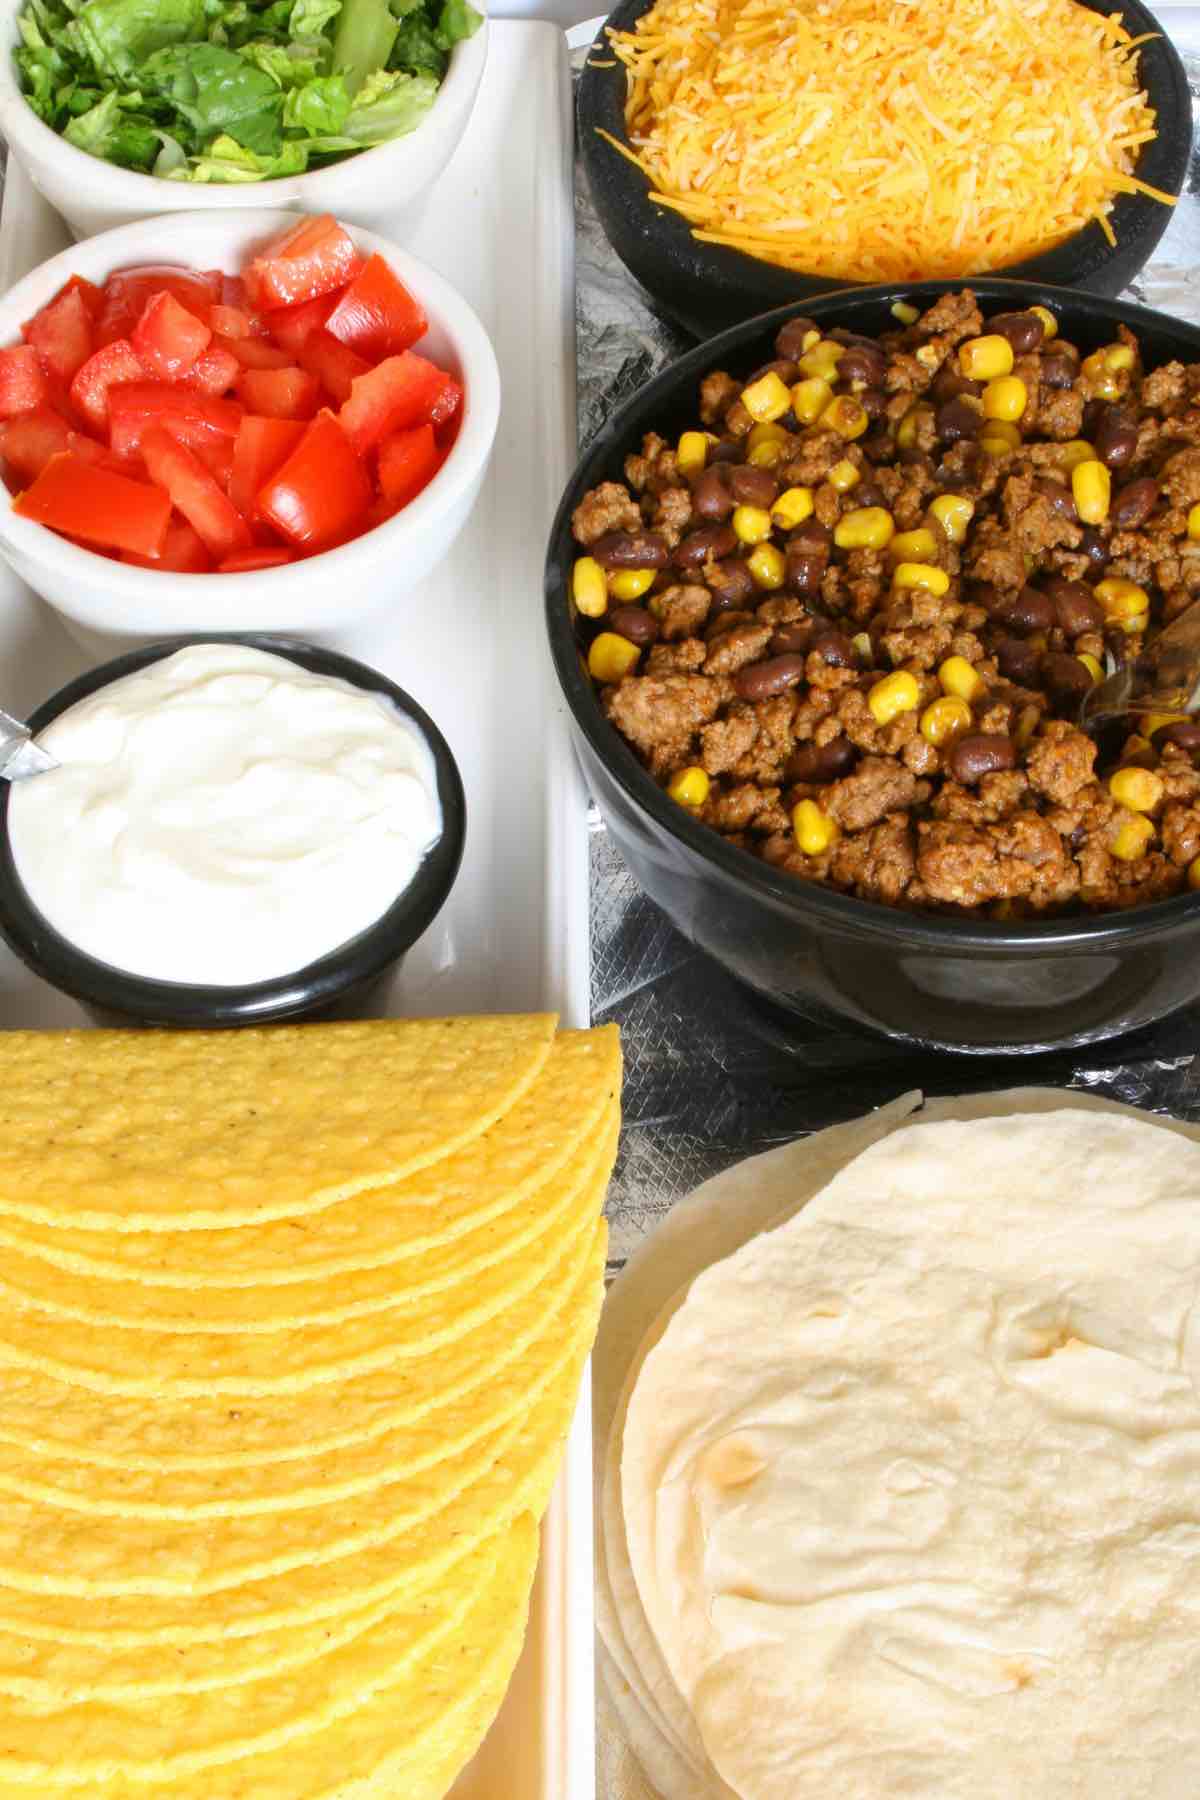 Taco Tuesday? Or simply craving tacos? Why not go all the way and have a taco bar?! It’s a lot easier to put together than you think, and we've collected 16 Best Taco Bar Ideas that will take your love for tacos to a new level!